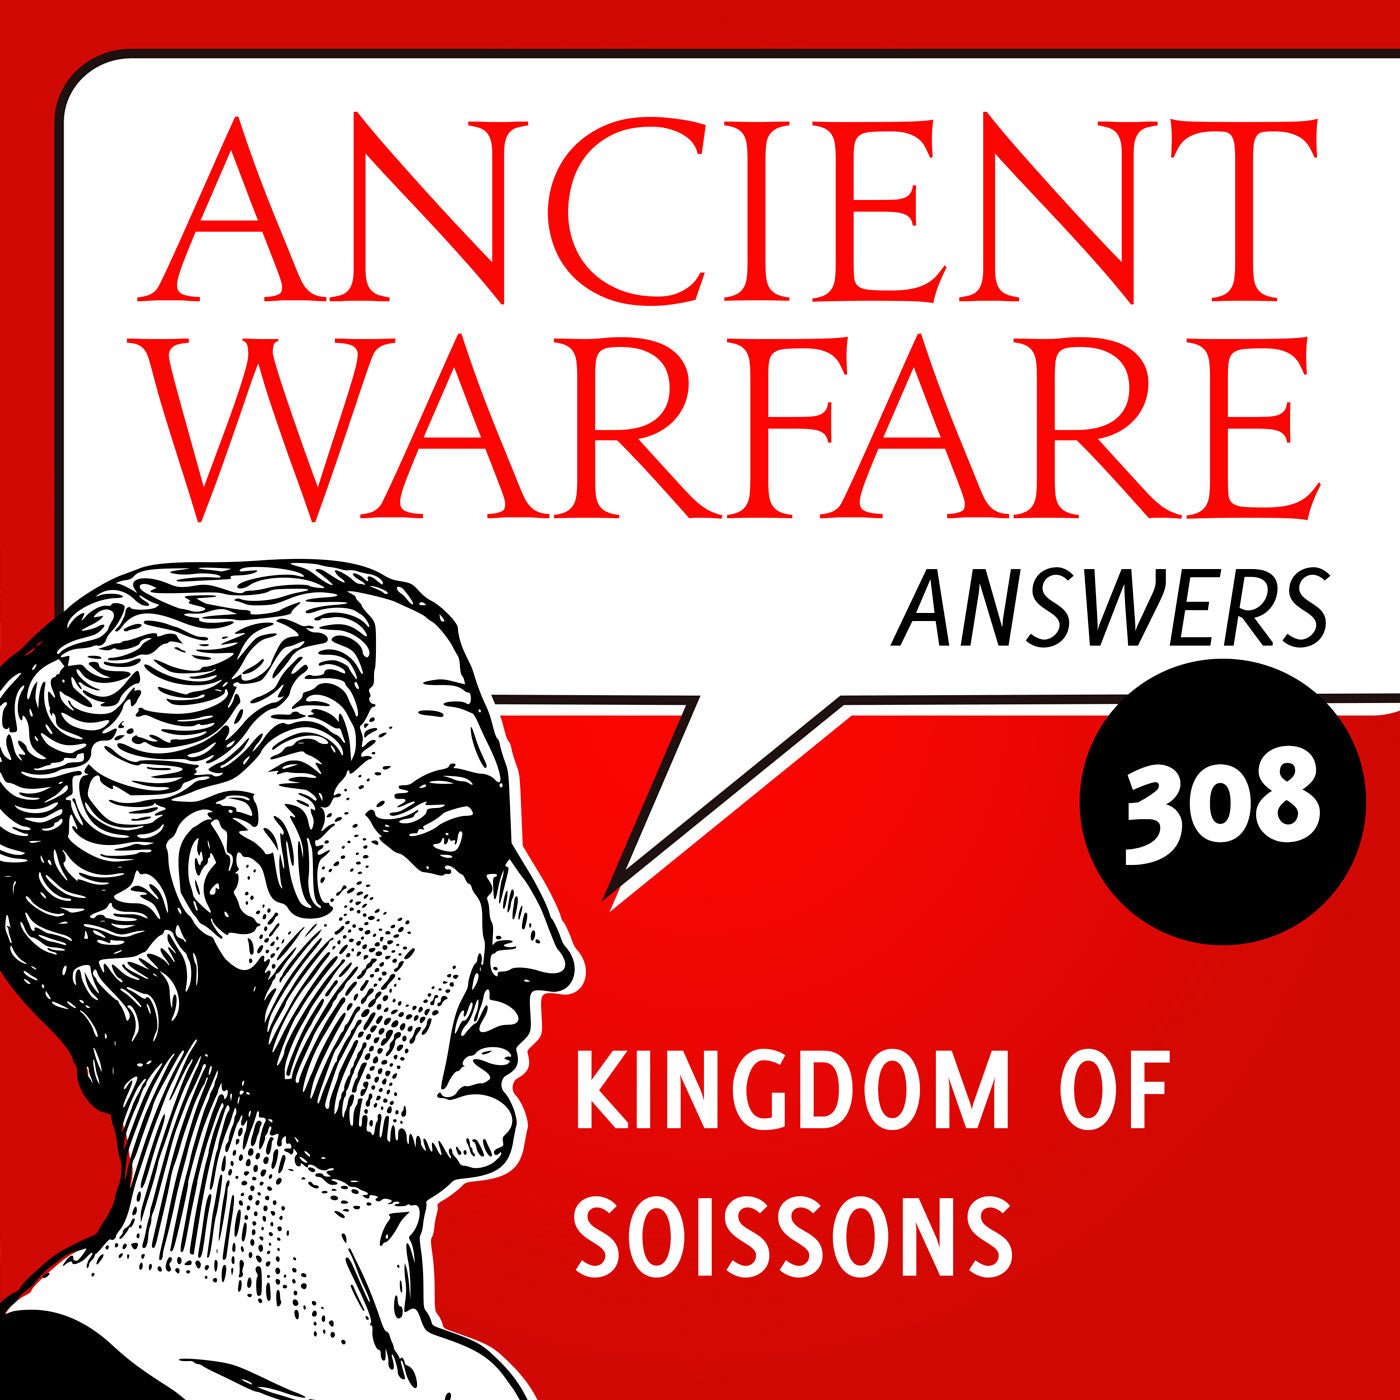 Ancient Warfare Answers (308): The Kingdom of Soissons